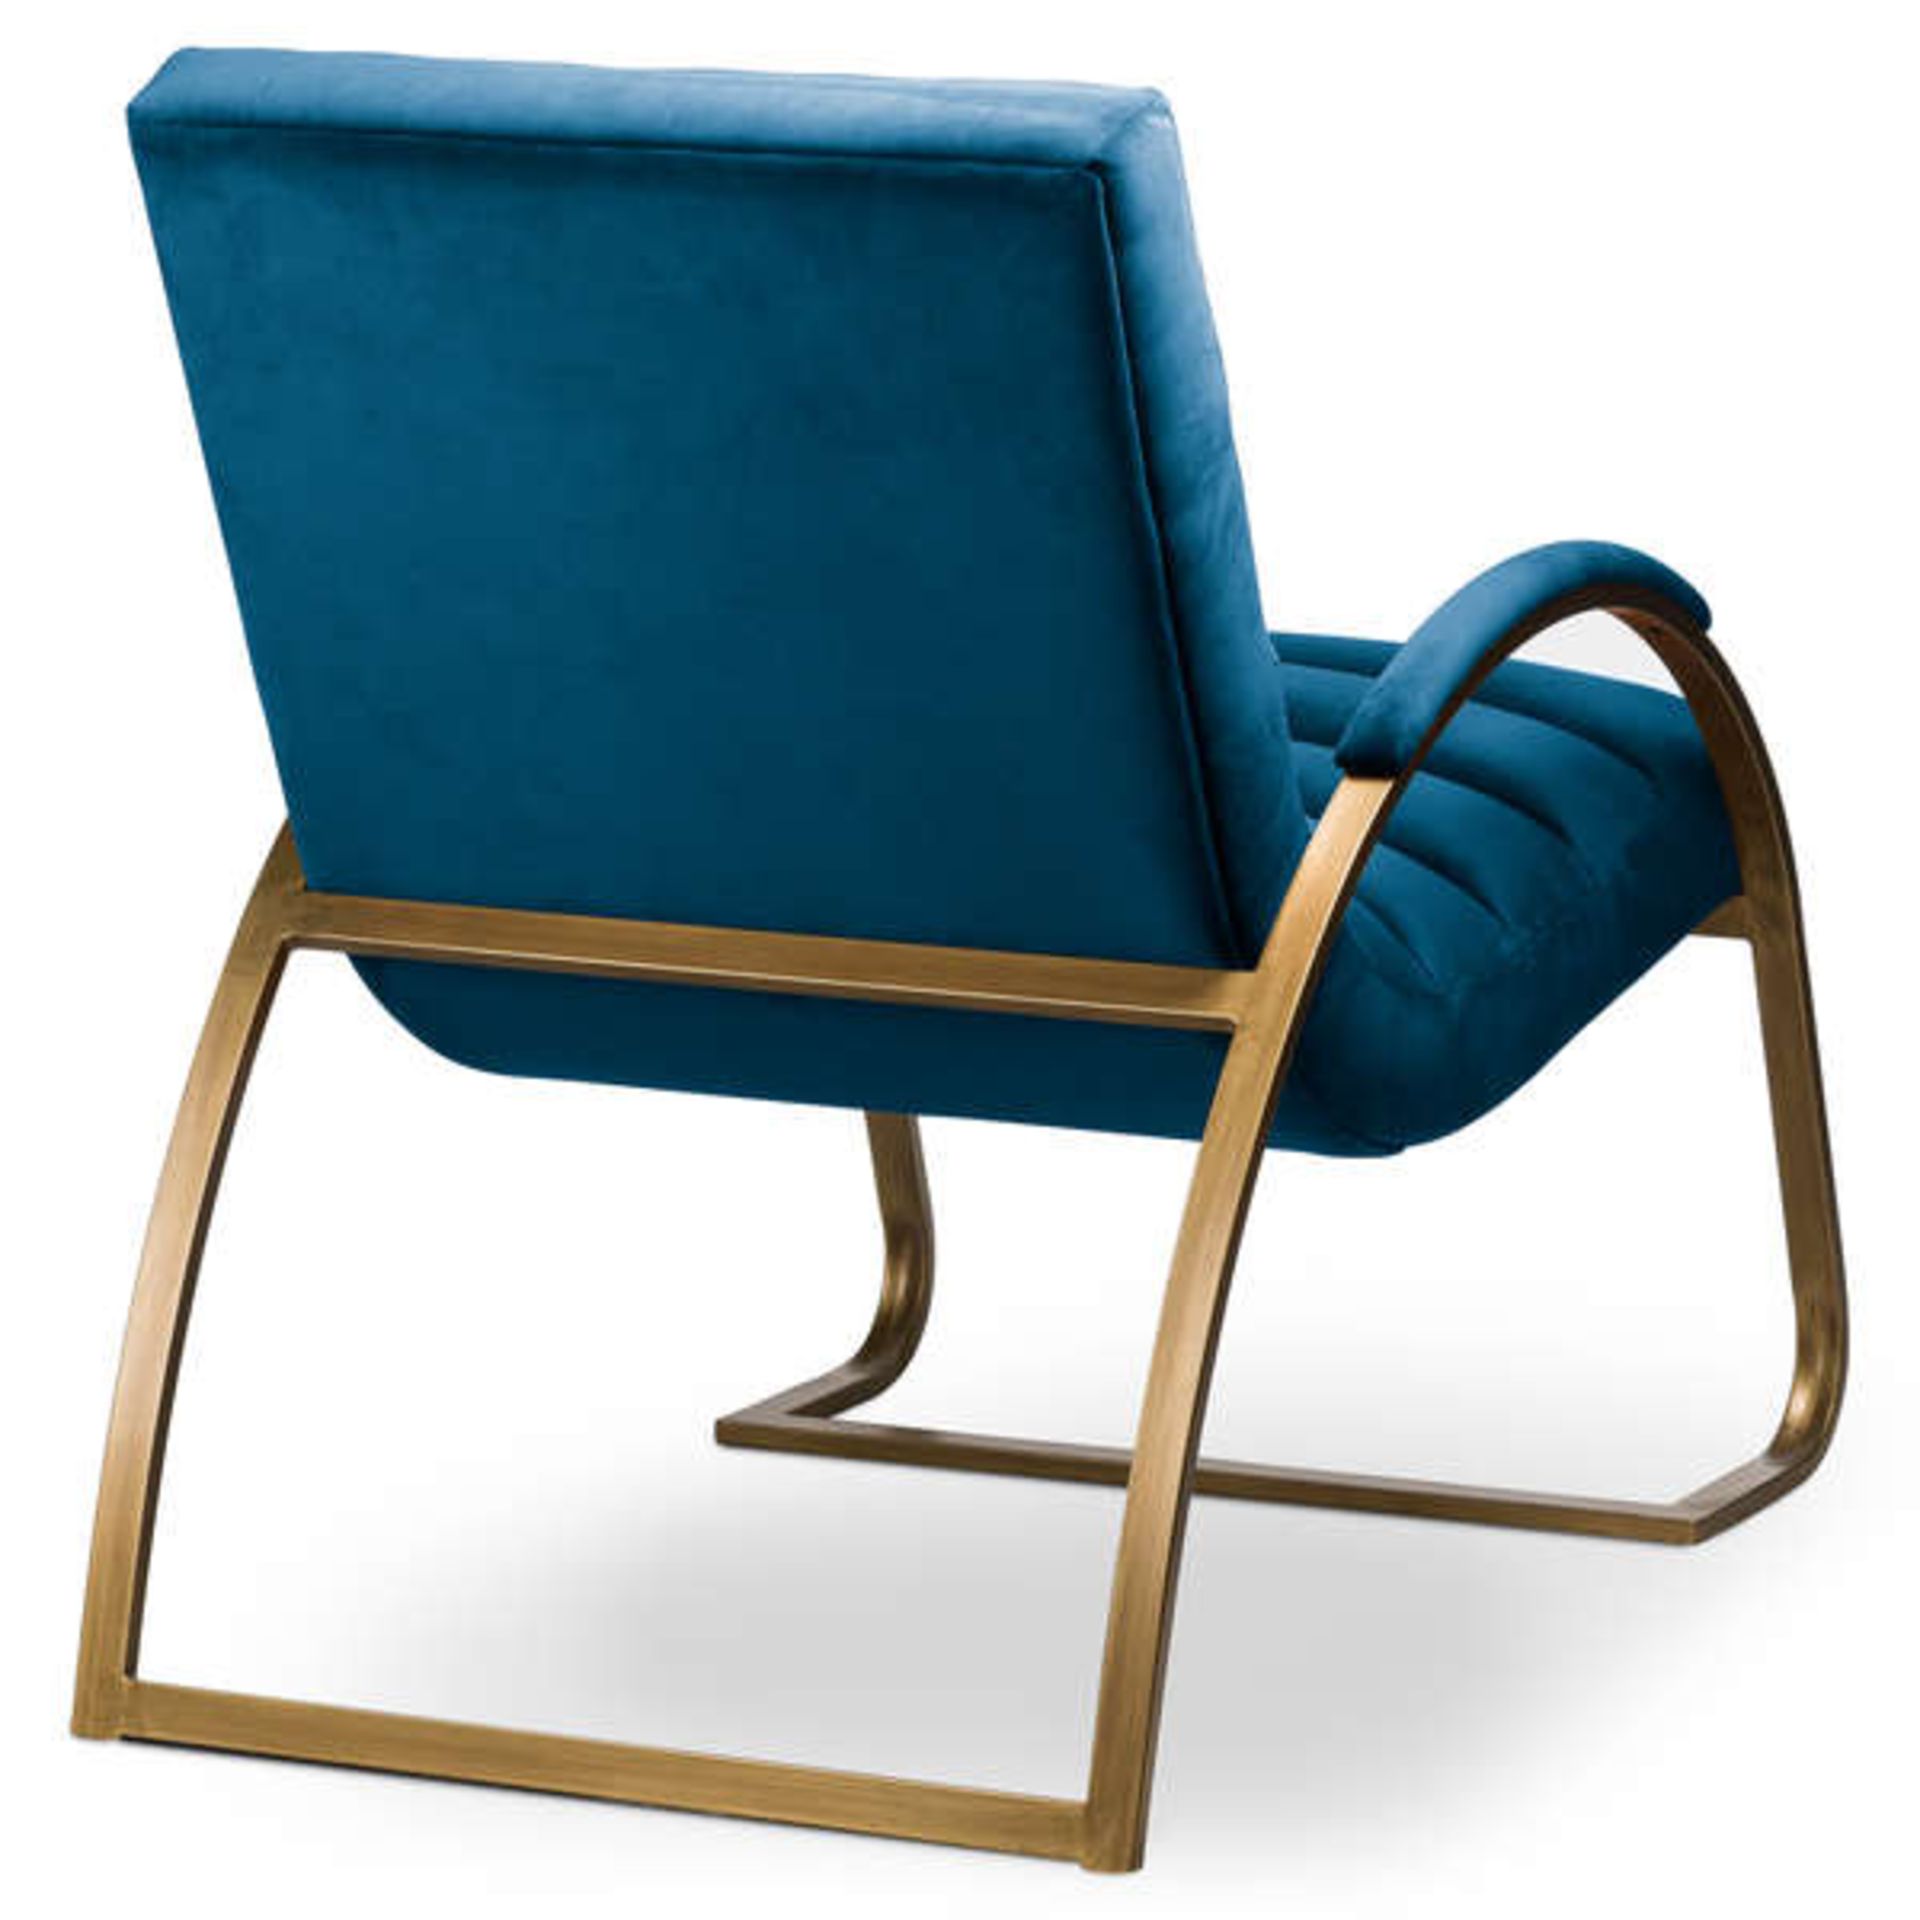 Arc Chair Oxford Navy Blue Velvet and Brass Ribbed Ark Chair curate a stylish yet comfortable - Image 3 of 5